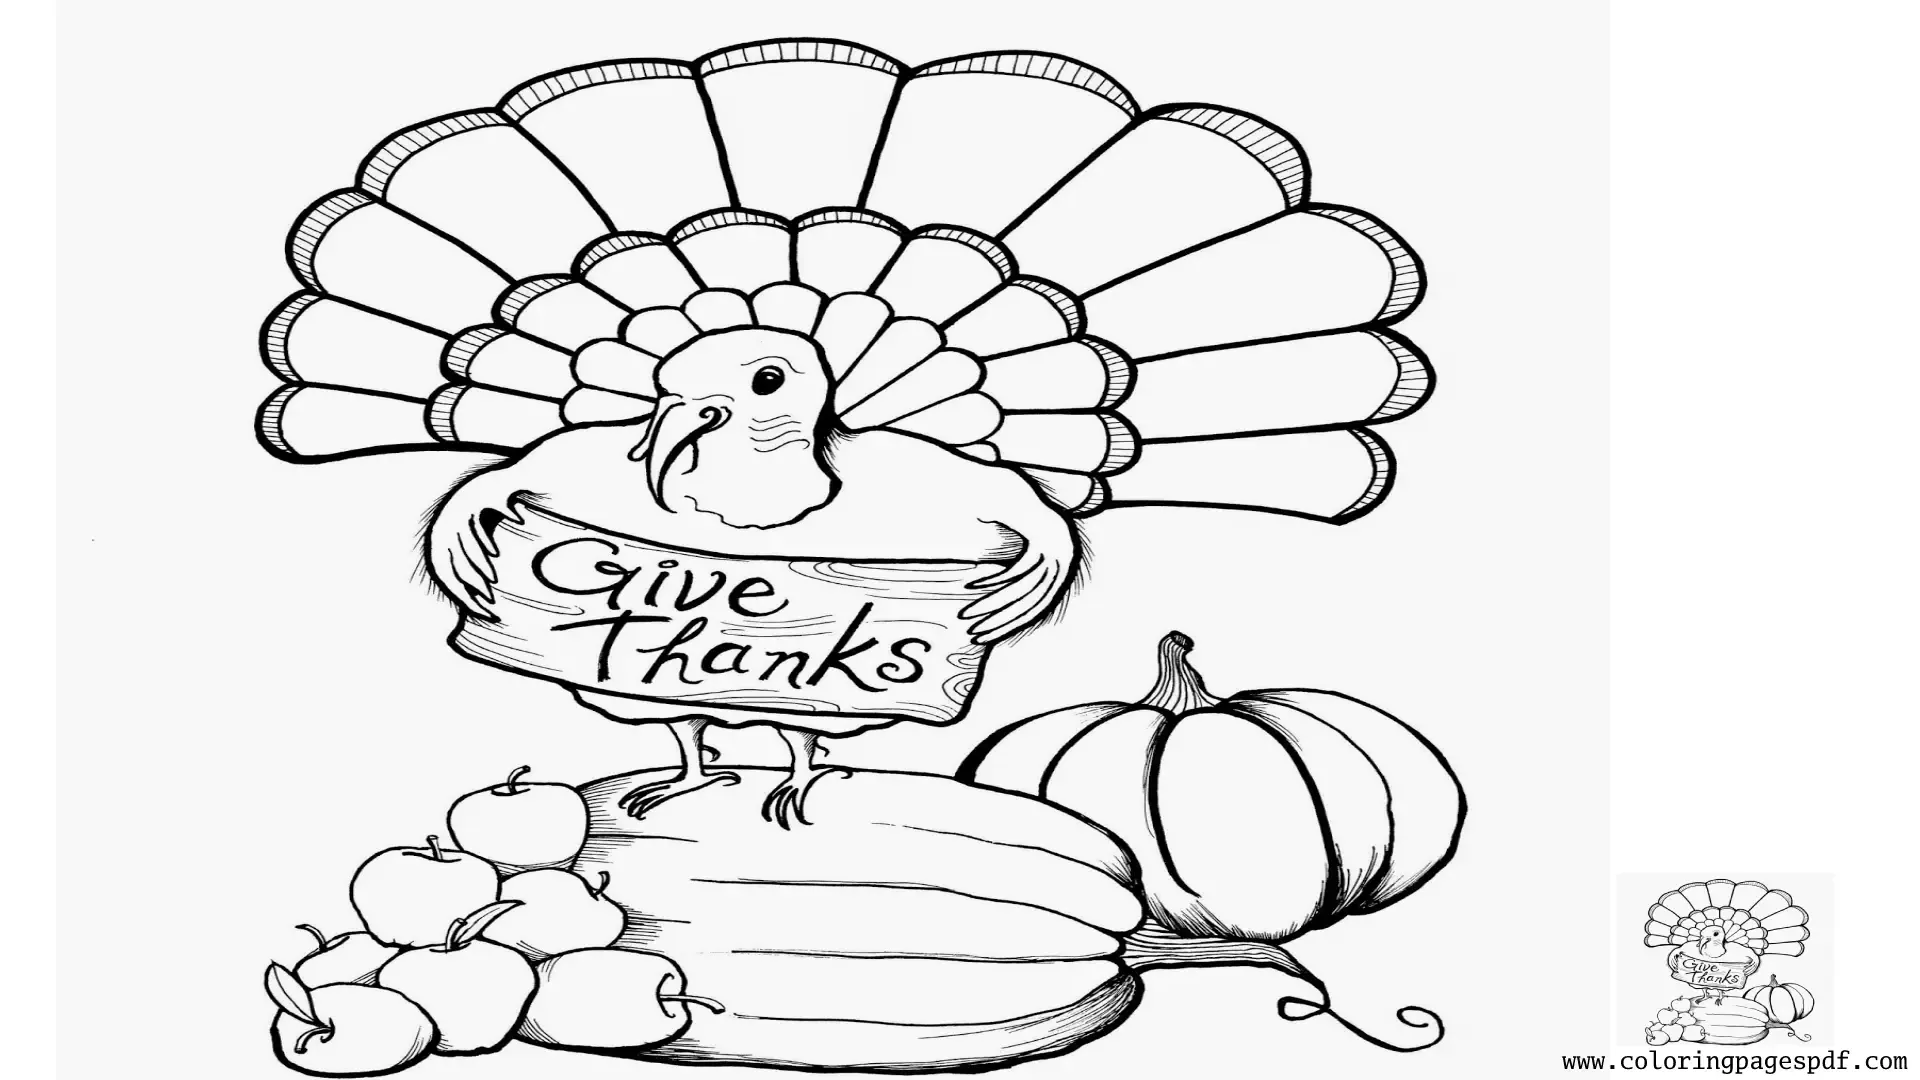 Coloring Page Of A Turkey On Top Of Fruits And Vegetables